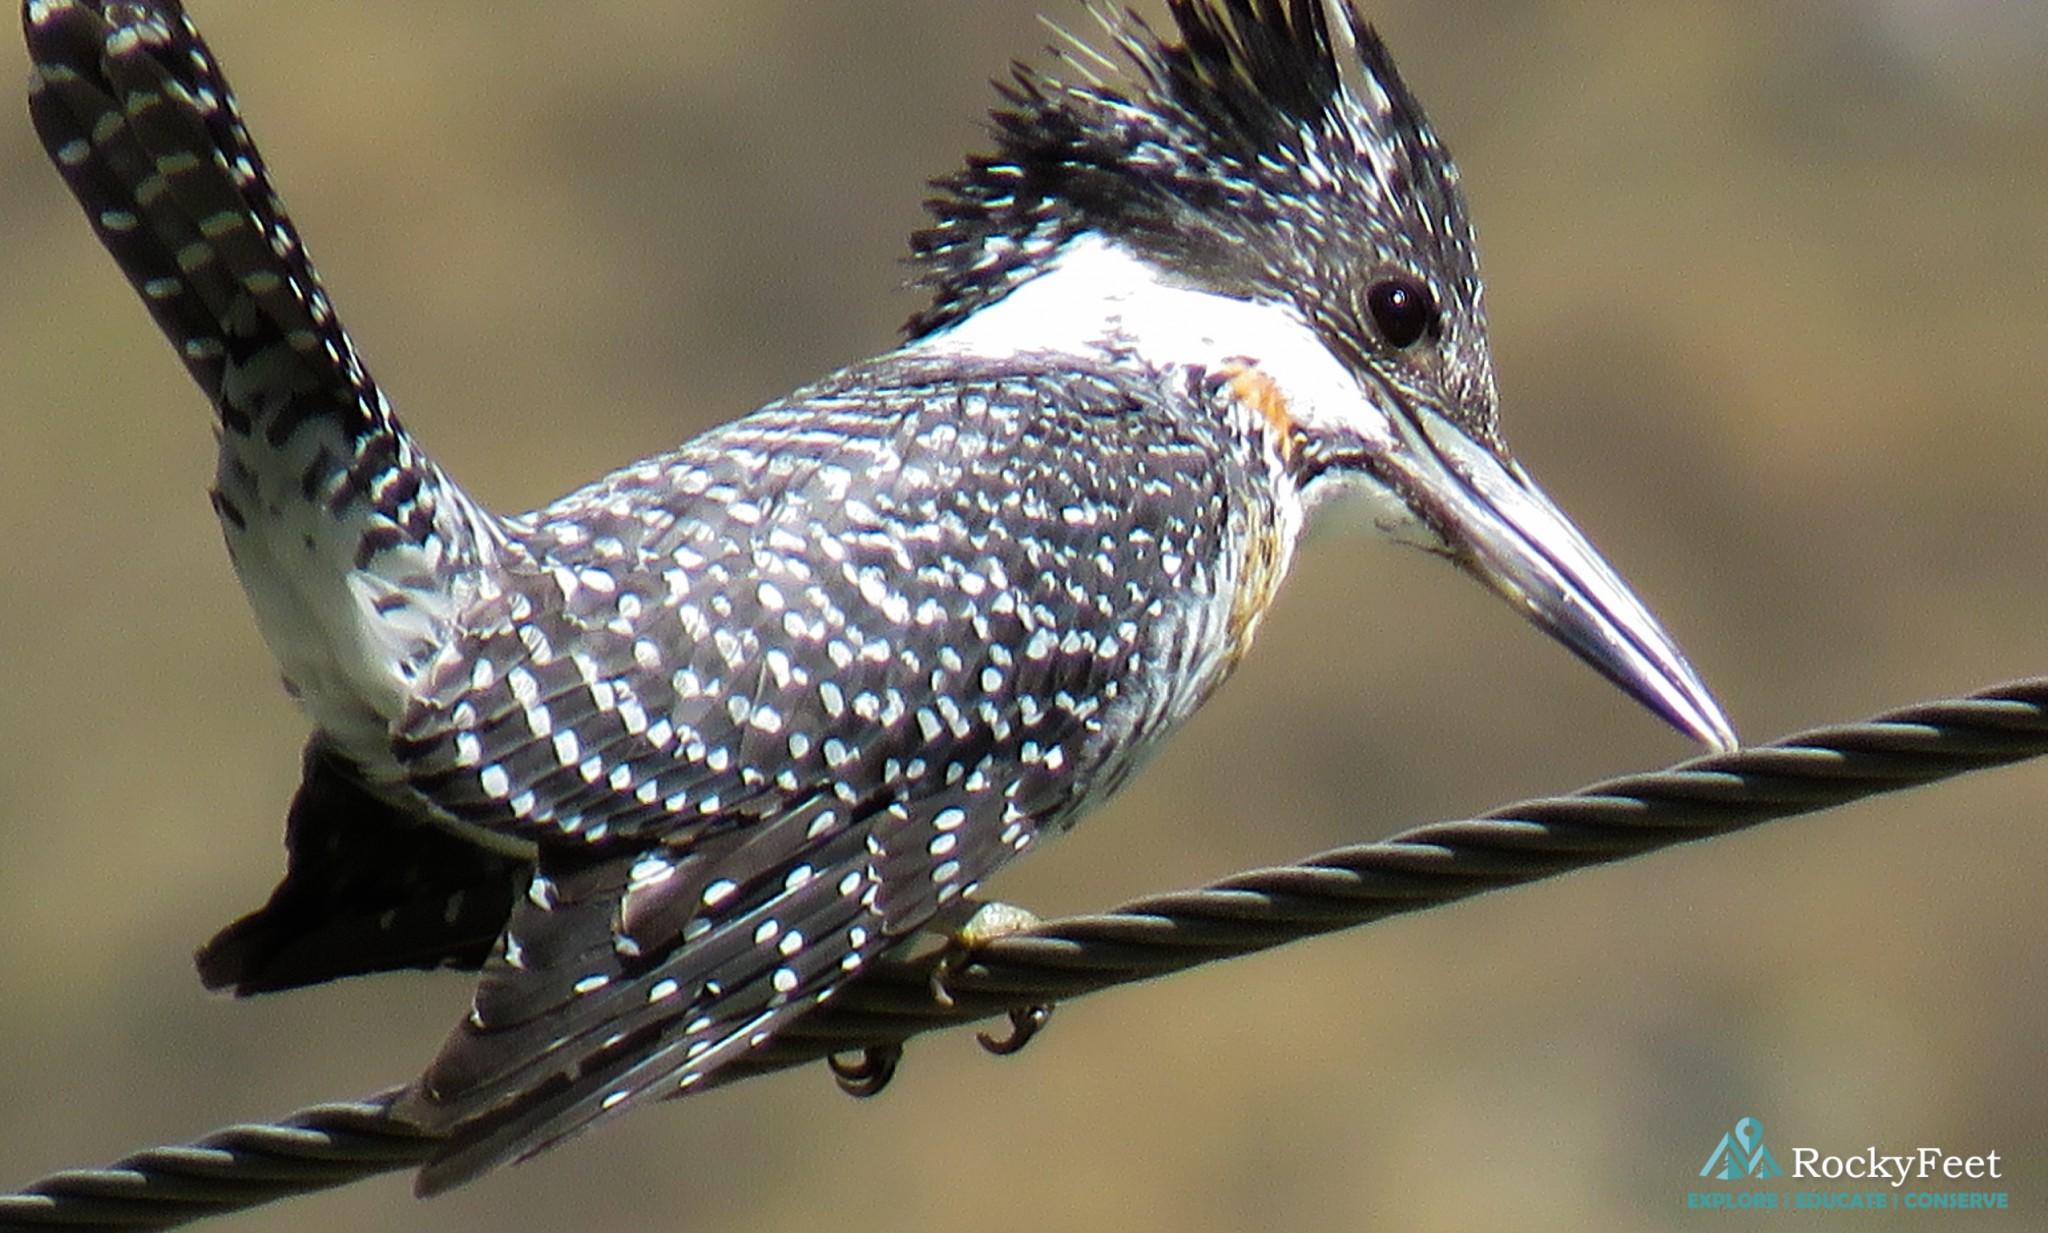 BIRDING DIARIES. TIRTHAN VALLEY. QUEST FOR THE CRESTED KINGFISHER